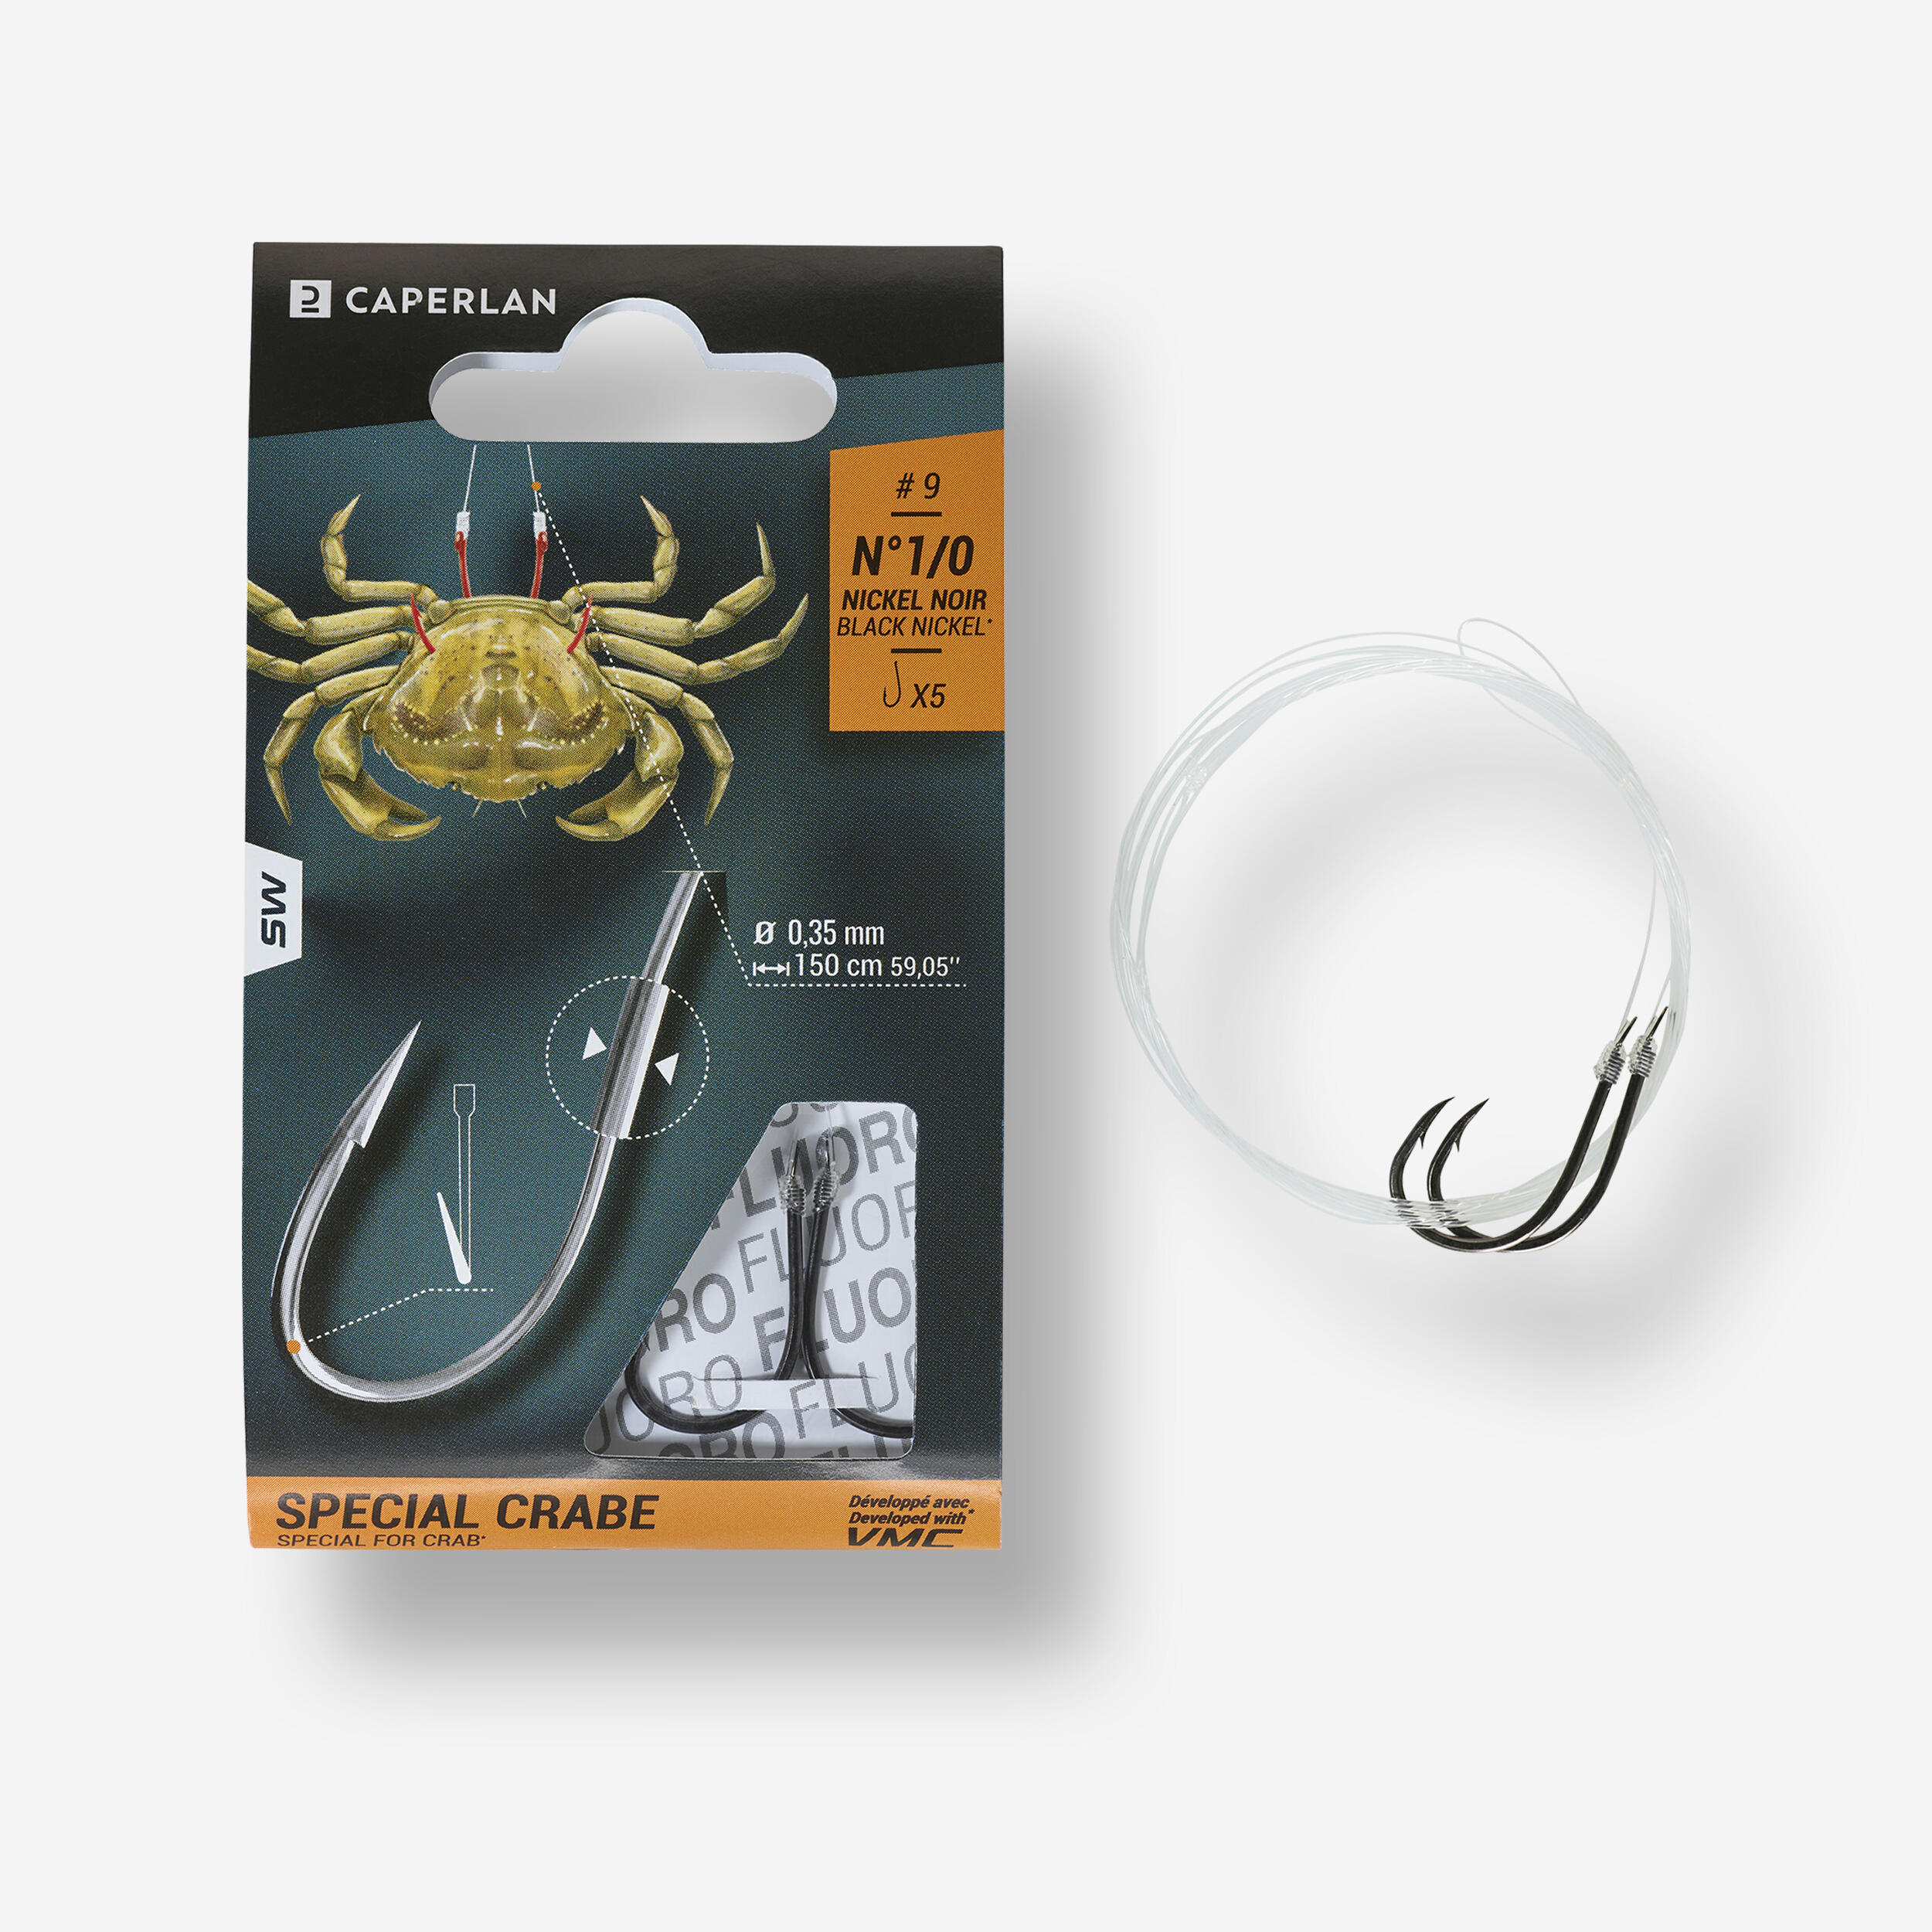 CAPERLAN SWSHKFLOCB spade-end hooks to line especially designed for sea fishing with crab